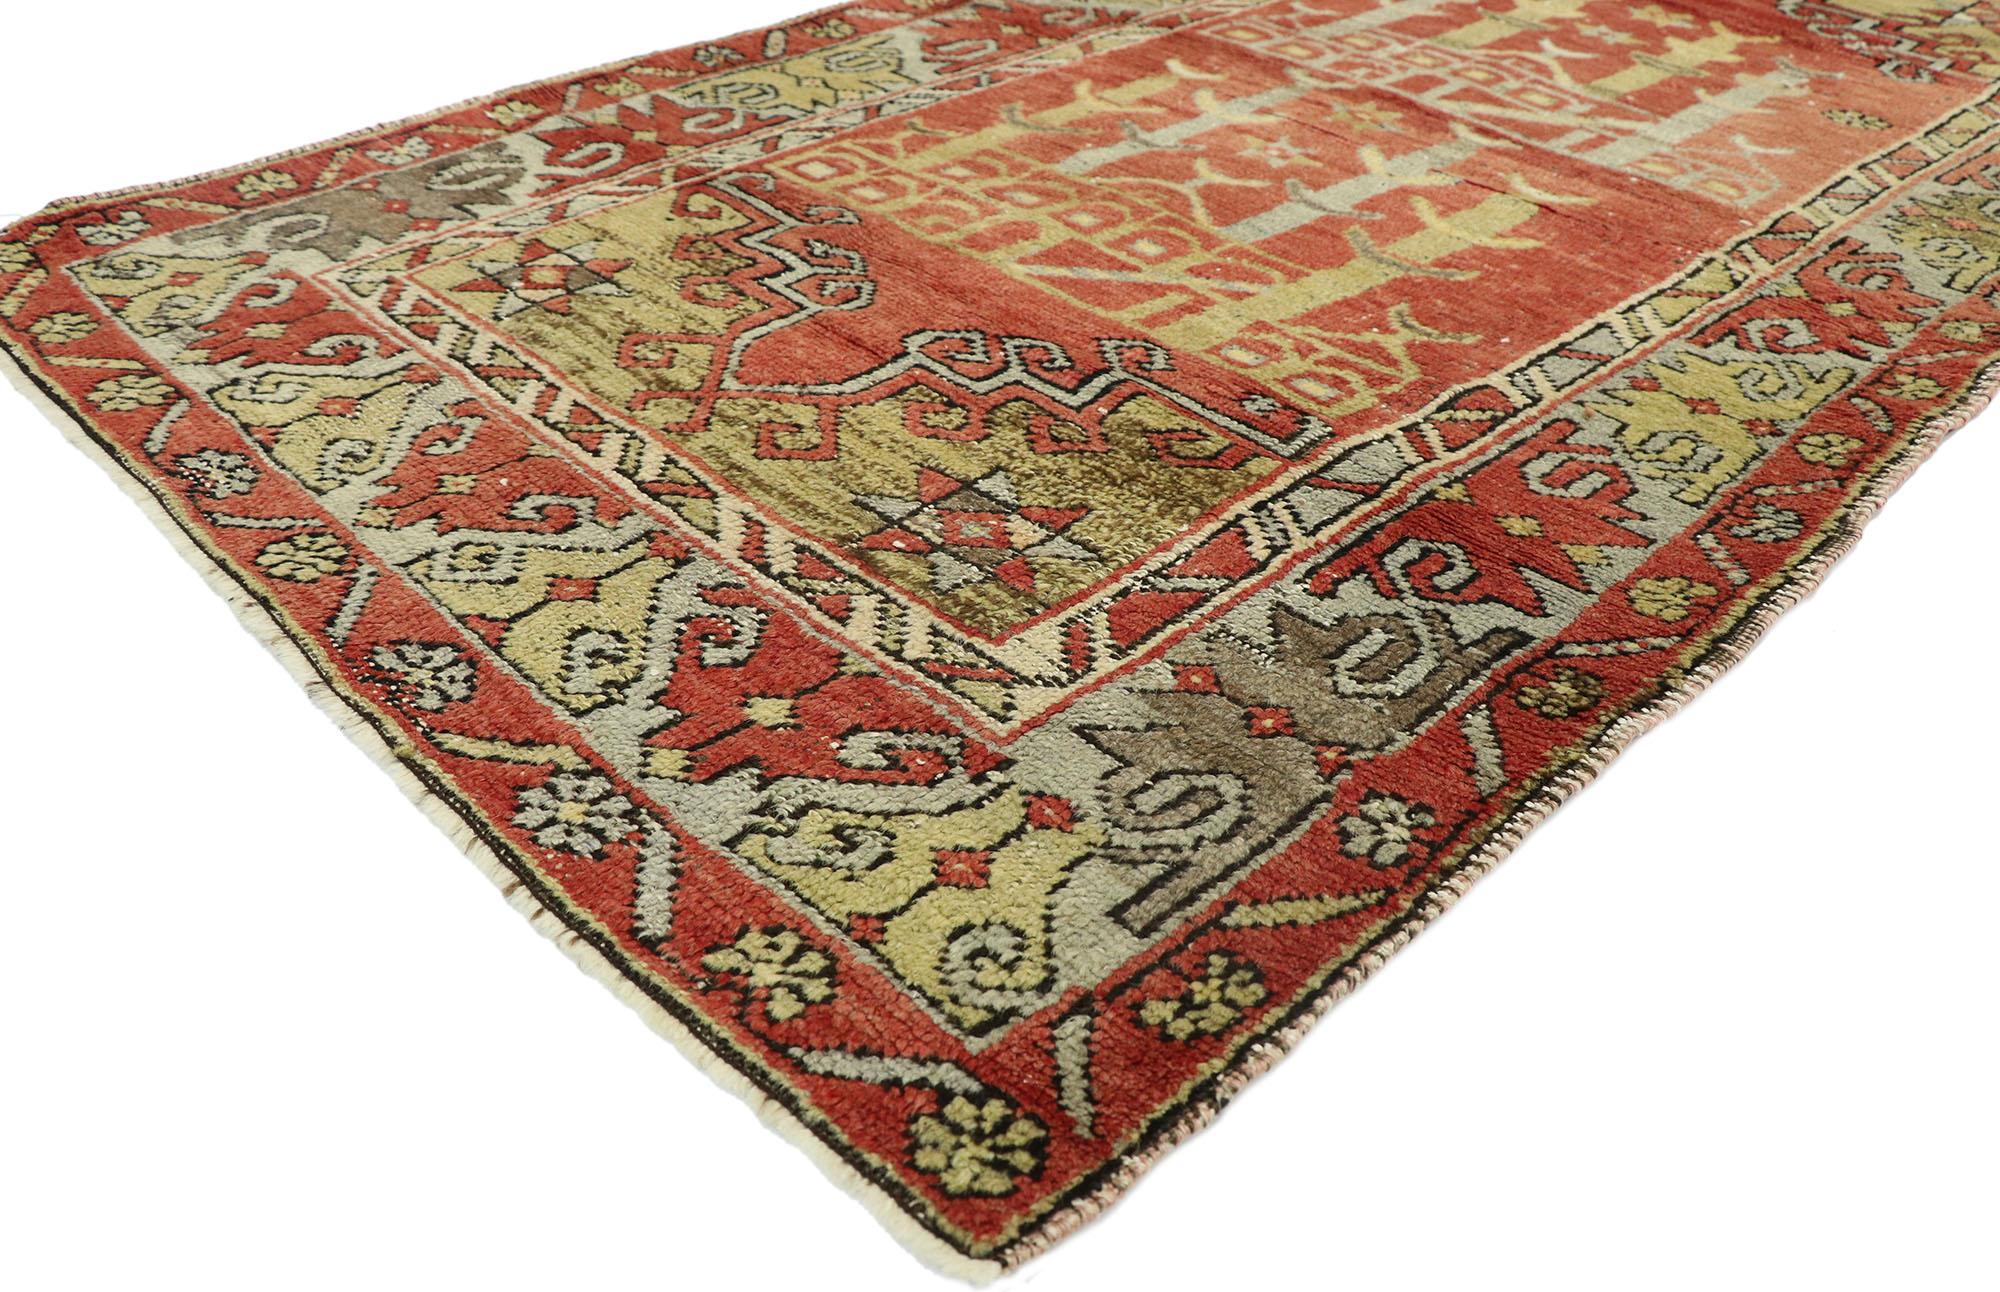 52700, vintage Turkish Oushak Prayer rug, Anatolian Prayer rug. Immersed in Anatolian history and refined colors, this hand knotted wool vintage Turkish prayer rug combines simplicity with sophistication. It features a double compartment each